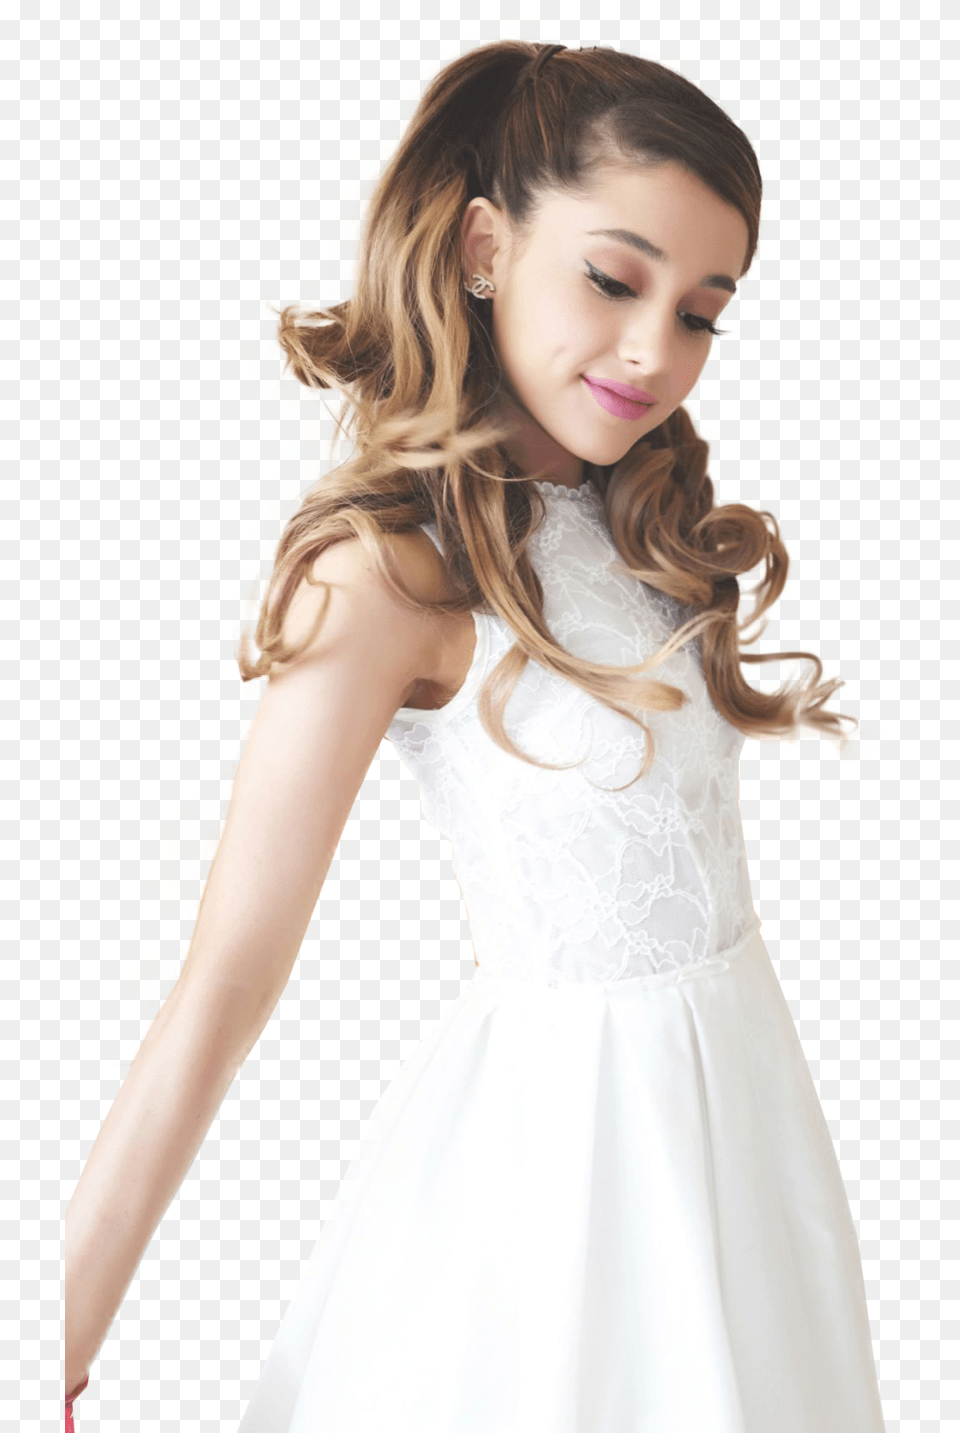 Ariana Grande Dress Photography Prom Cute Ariana Grande 2014, Wedding Gown, Clothing, Wedding, Fashion Free Png Download